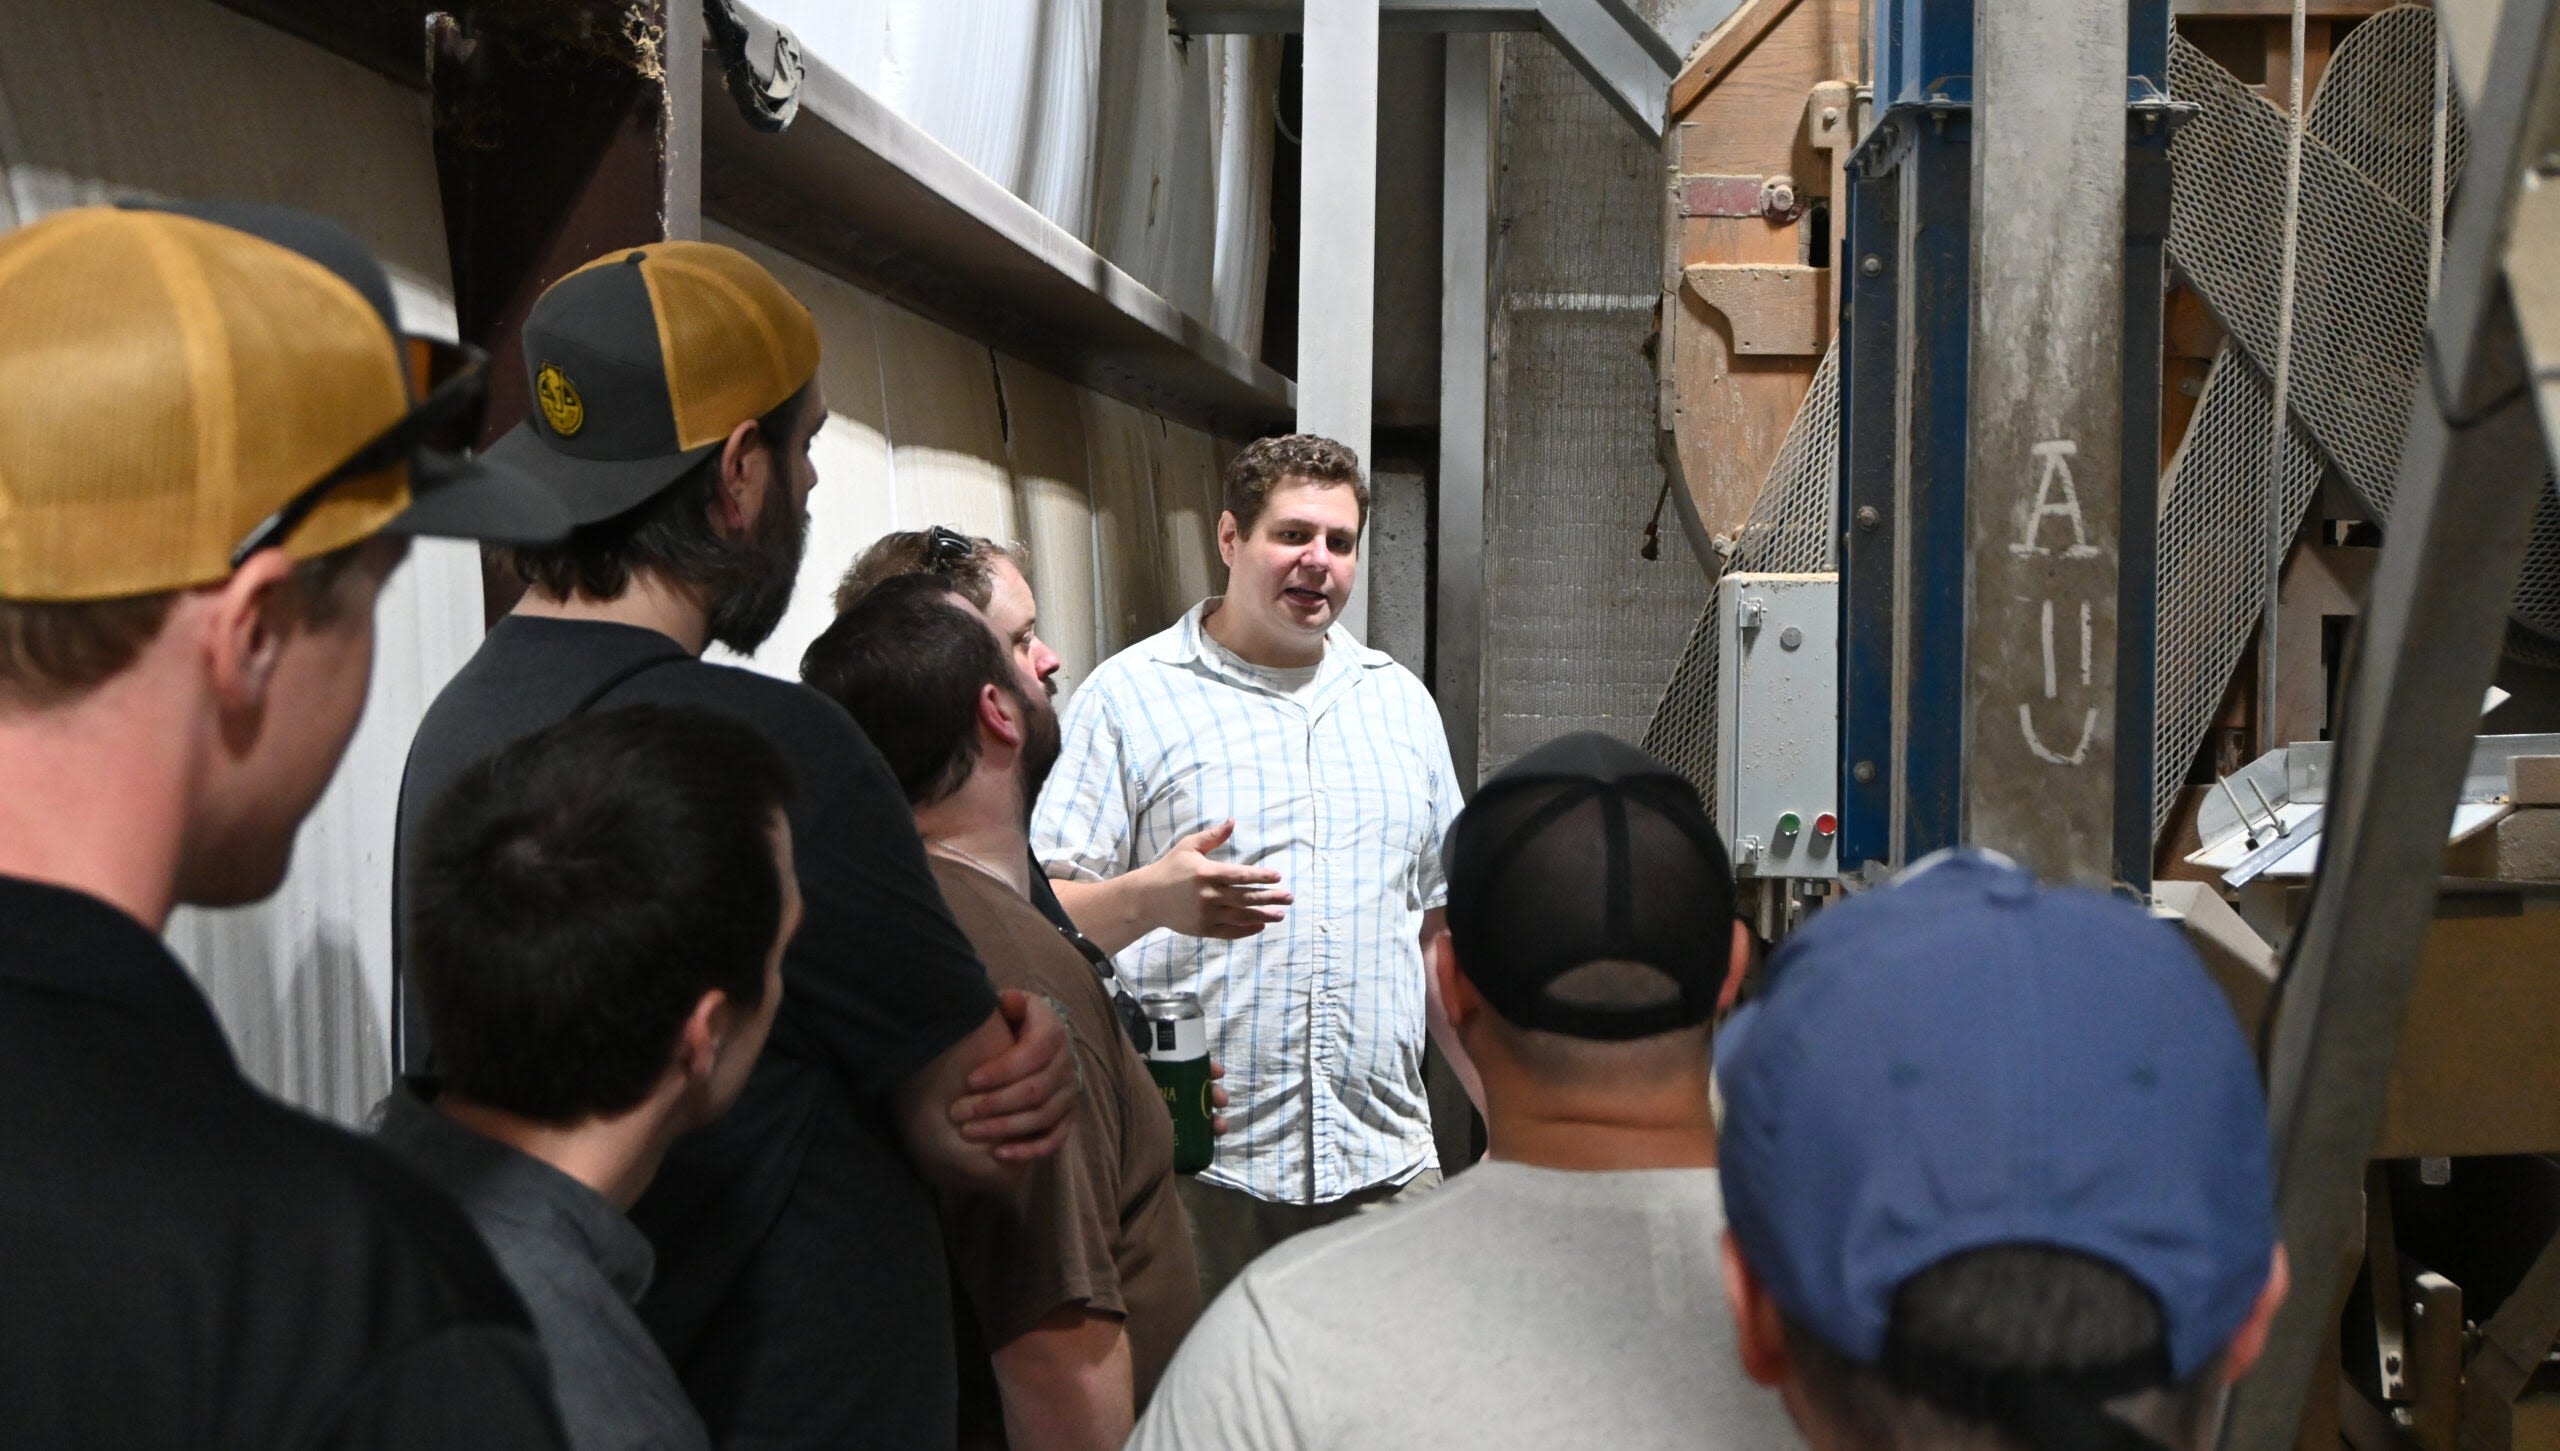 Hoppin’ good time: Carolina Malt House hosts “Brewers Field Day and Harvest Party" - Salisbury Post